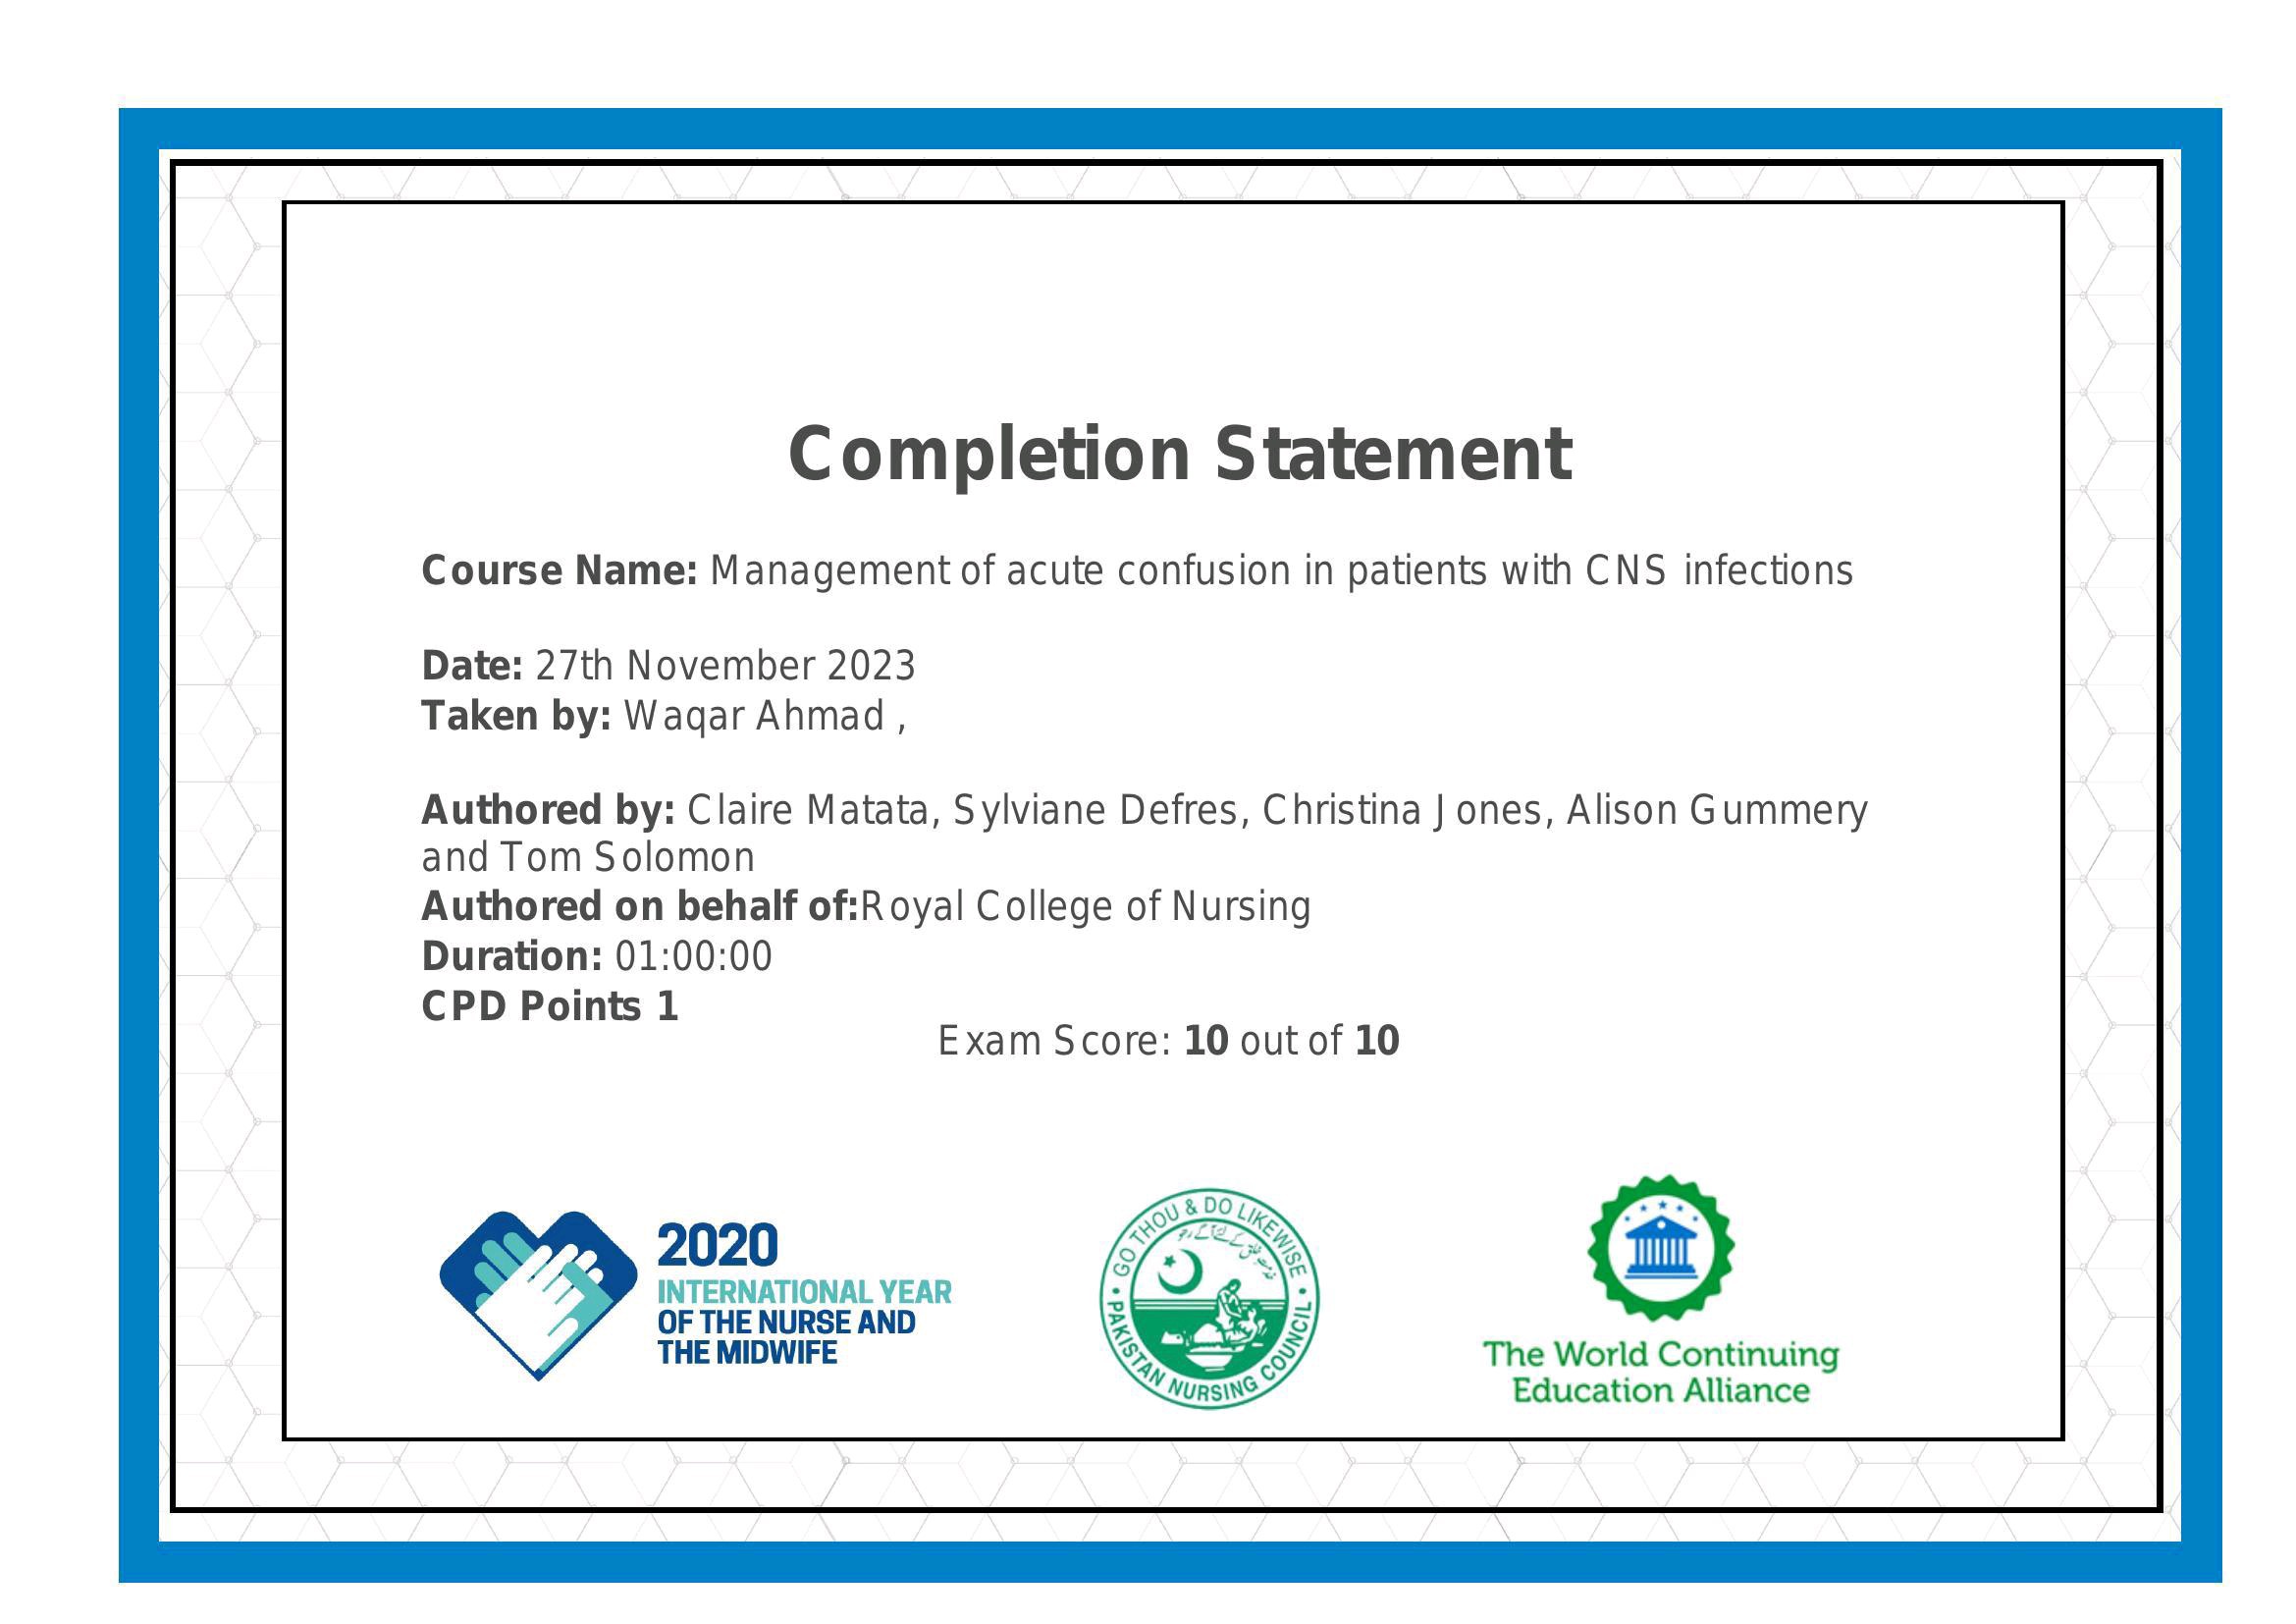 Completion Statement

Course Name: Management of acute confusion in patients with CNS infections

Date: 27th November 2023
Taken by: Wagar Ahmad ,

Authored by: Claire Matata, Sylviane Defres, Christina J ones, Alison Gummery
and Tom Solomon

Authored on behalf of:Royal College of Nursing

Duration: 01:00:00

CPD Points 1
Exam Score: 10 out of 10

INTERNATIONAL YEAR :

OF THE NURSE AND Ry

THE MIDWIFE : The World Continuing
Education Alliance